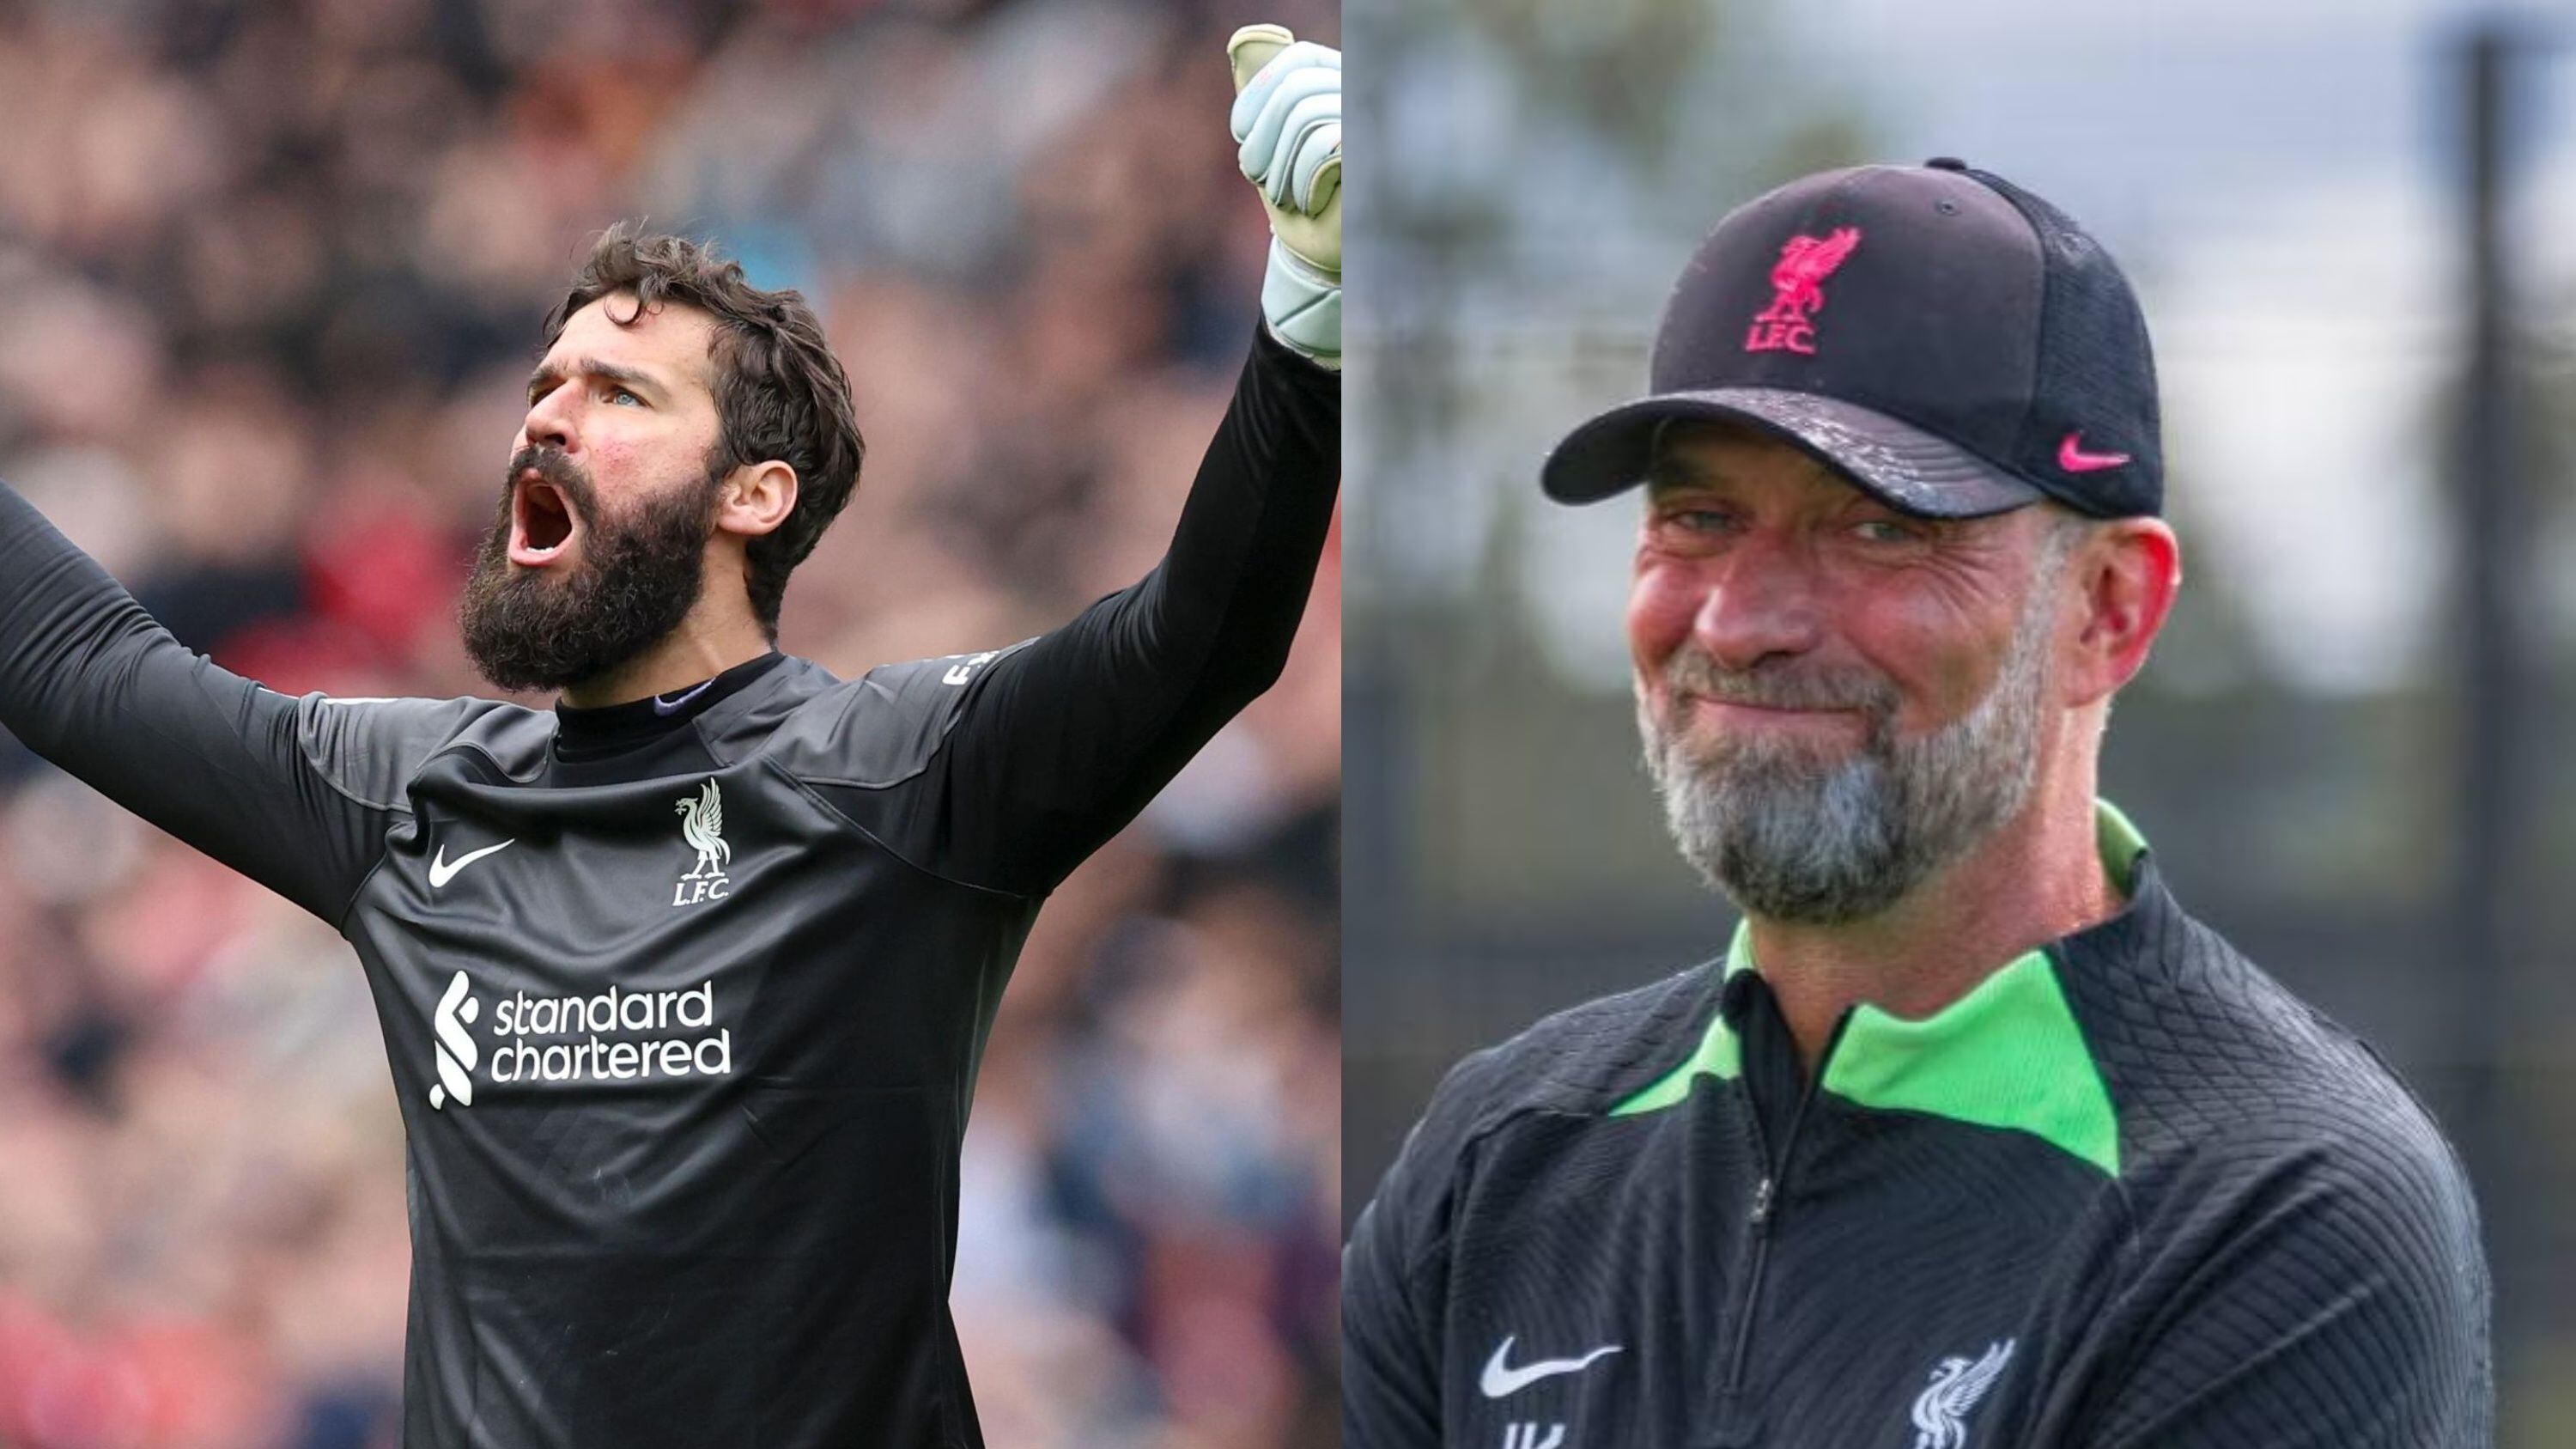 The surprising action of Alisson Becker prior to Liverpool's debut in the Premier League